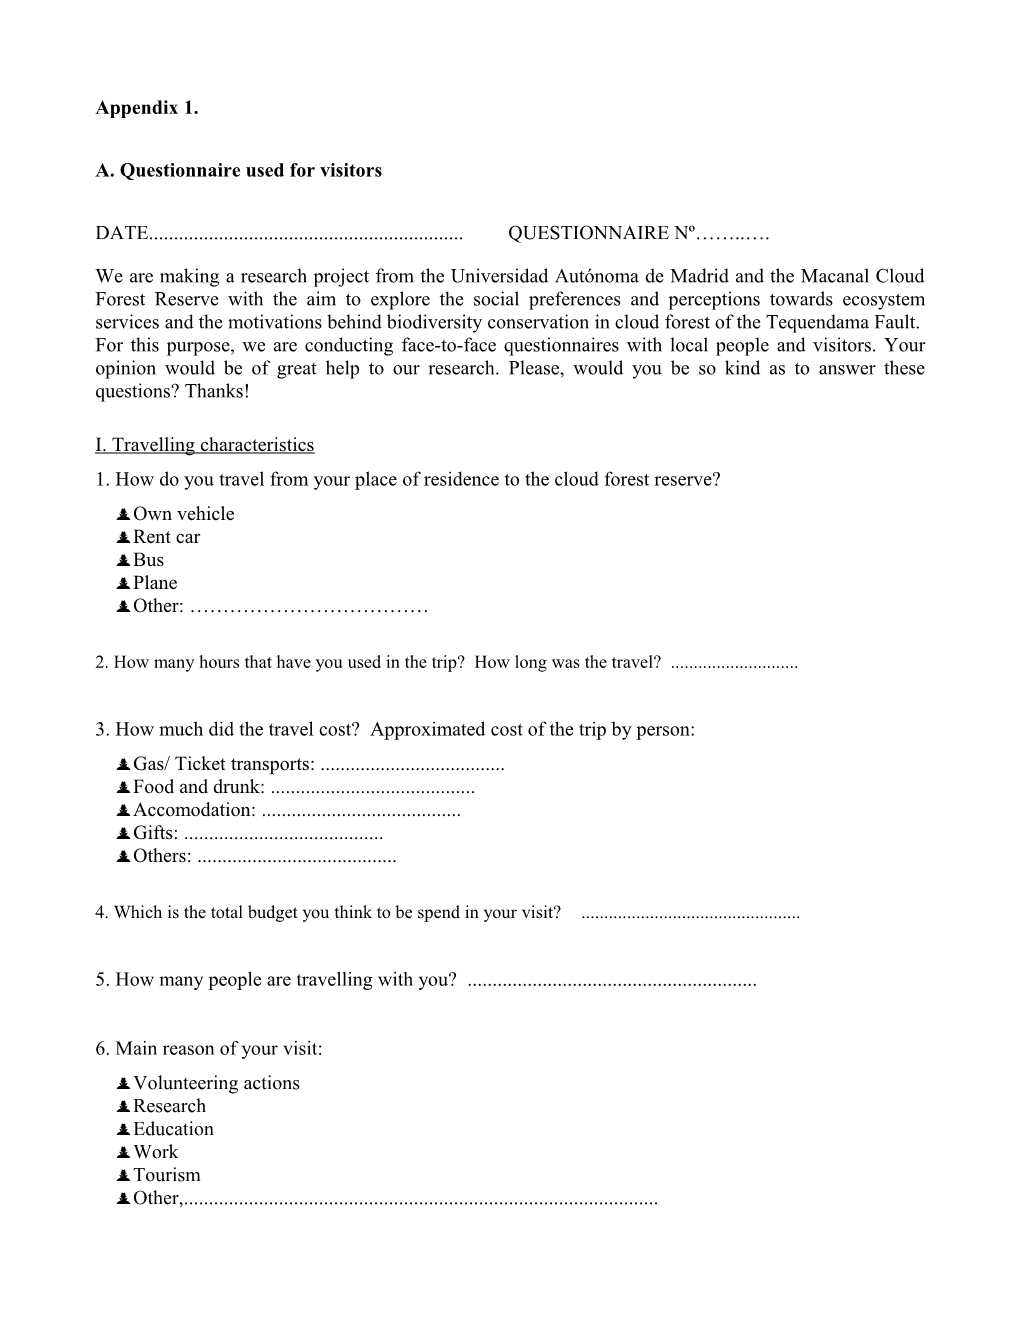 A. Questionnaire Used for Visitors